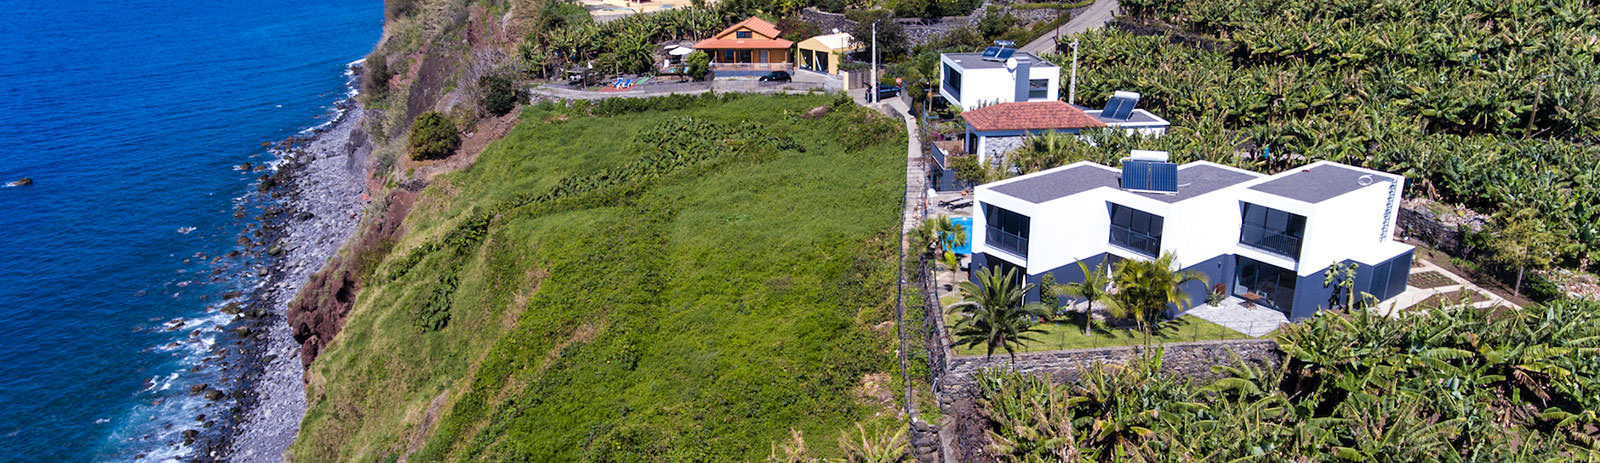 self catering madeira